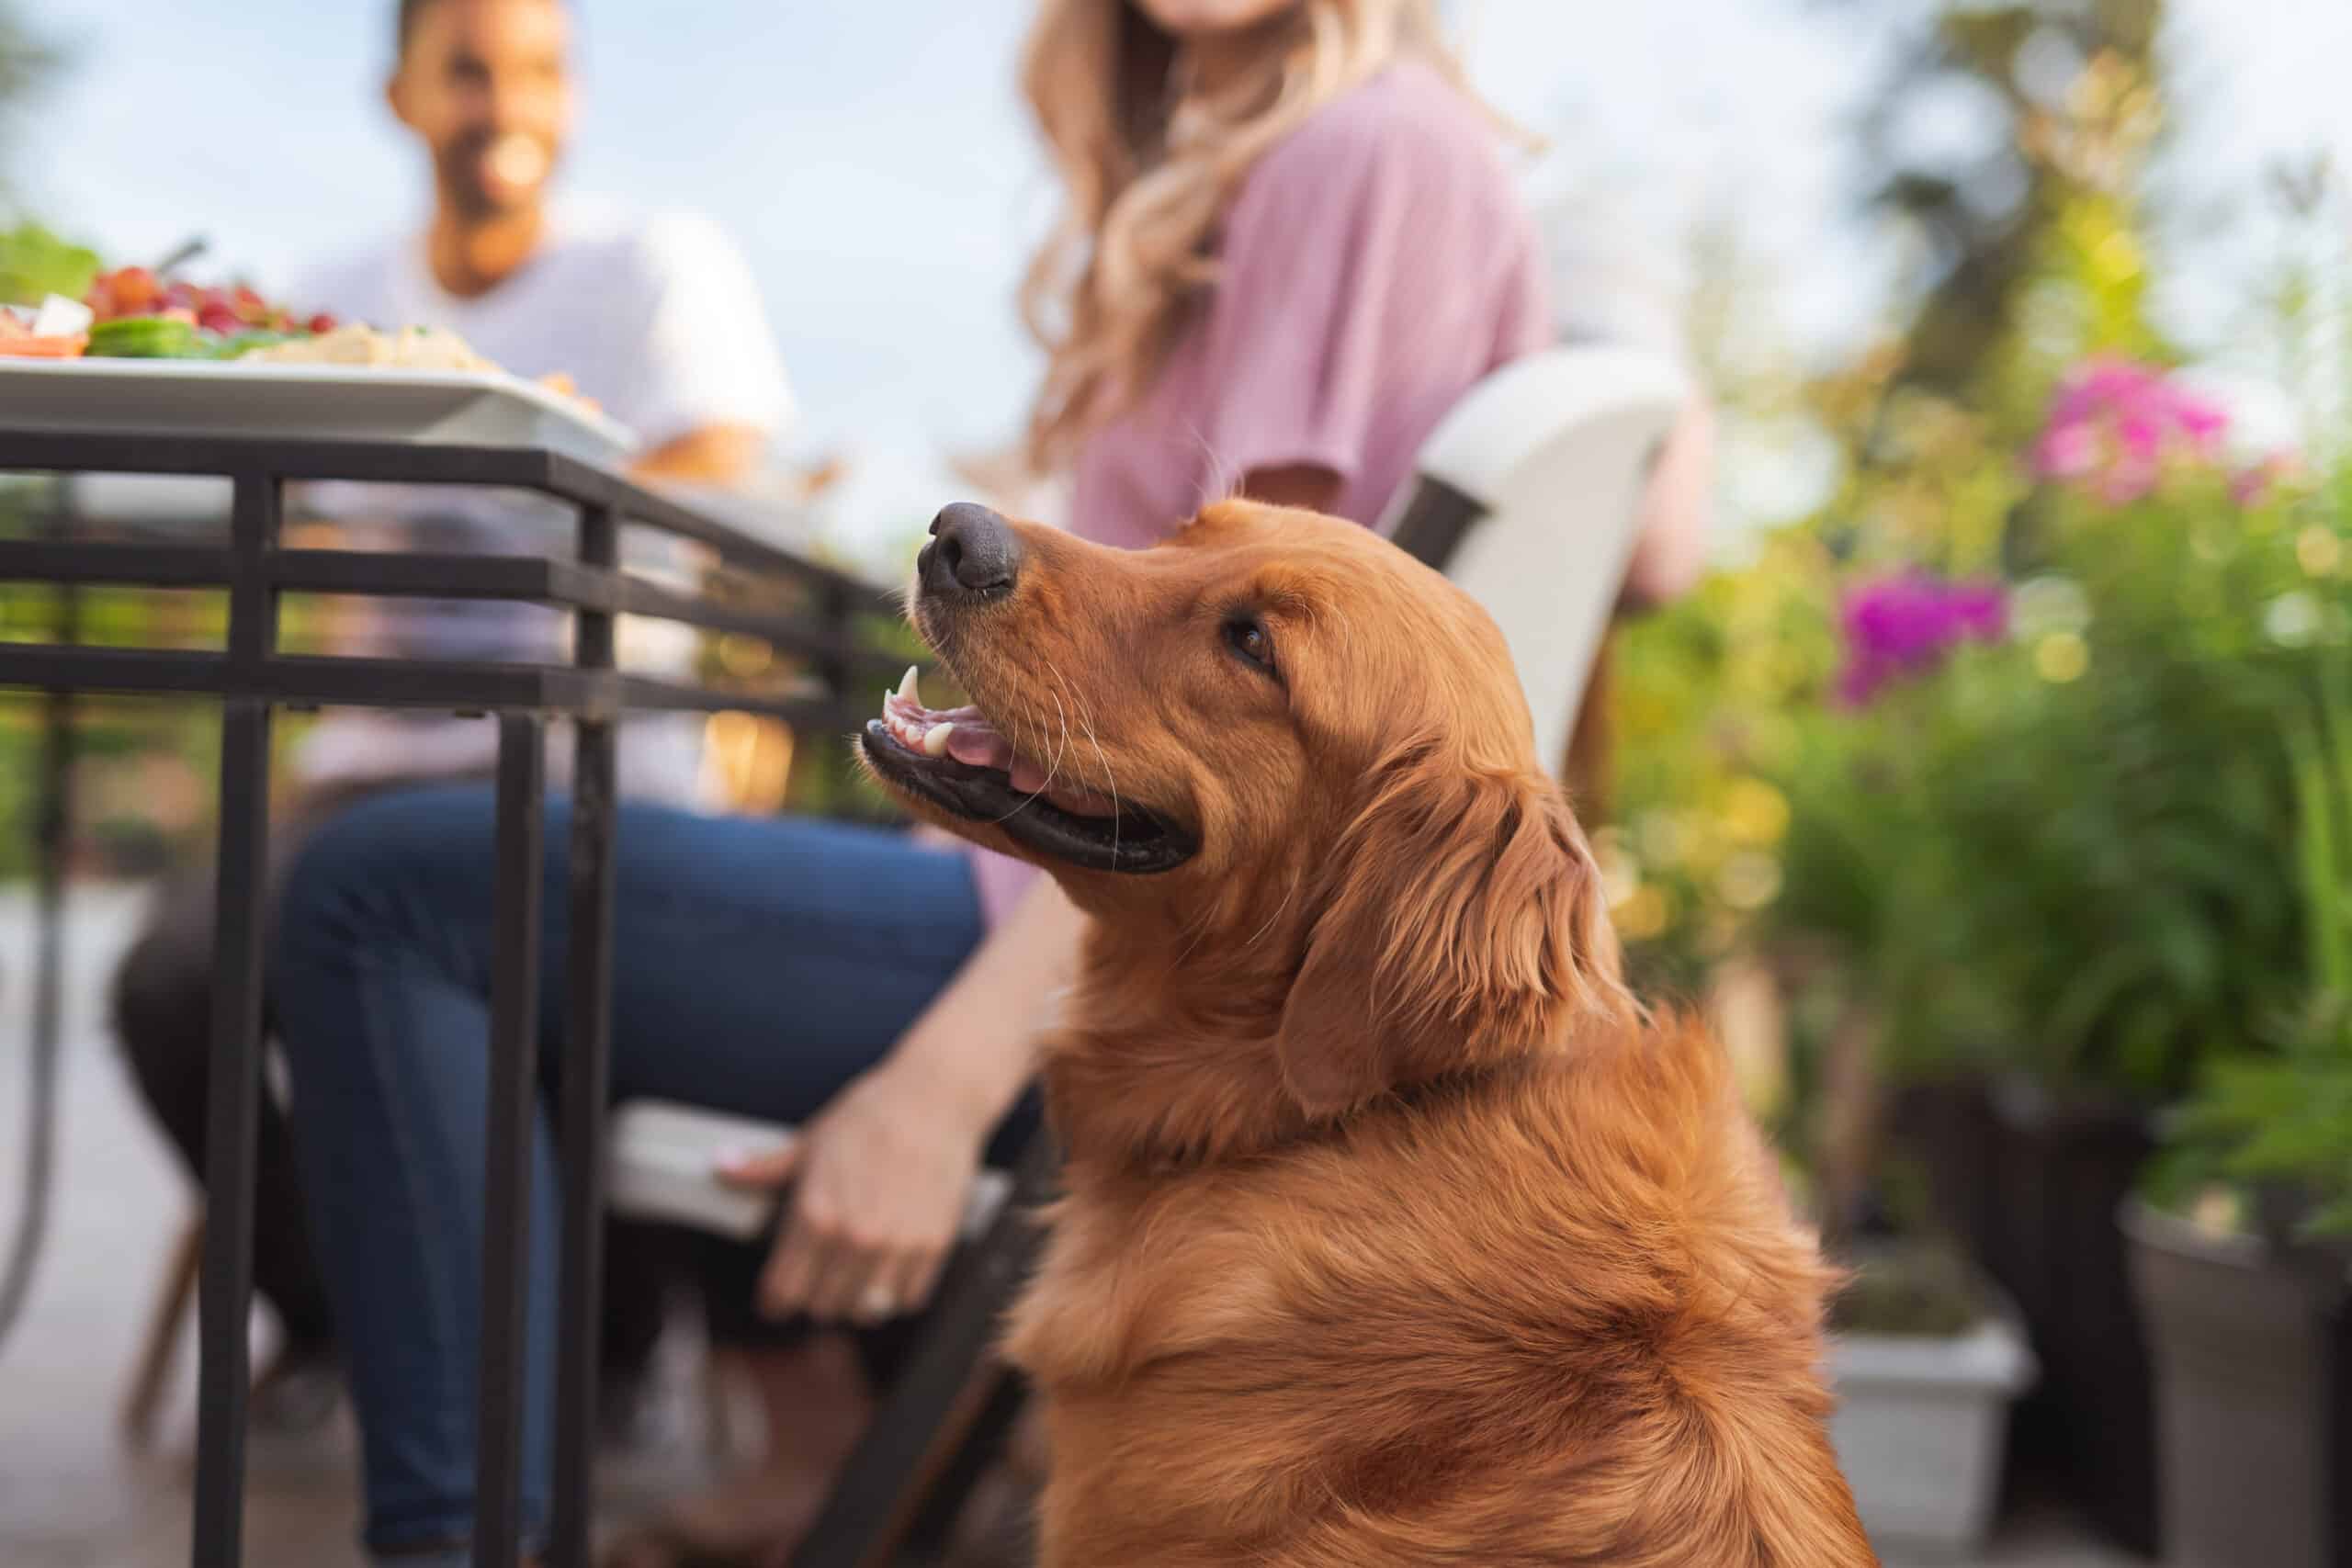 A multiethnic group of young friends enjoy good food and conversation together on a terrace outside on a summer evening. The focus iis on a beautiful golden retriever sitting by the table in the foreground.